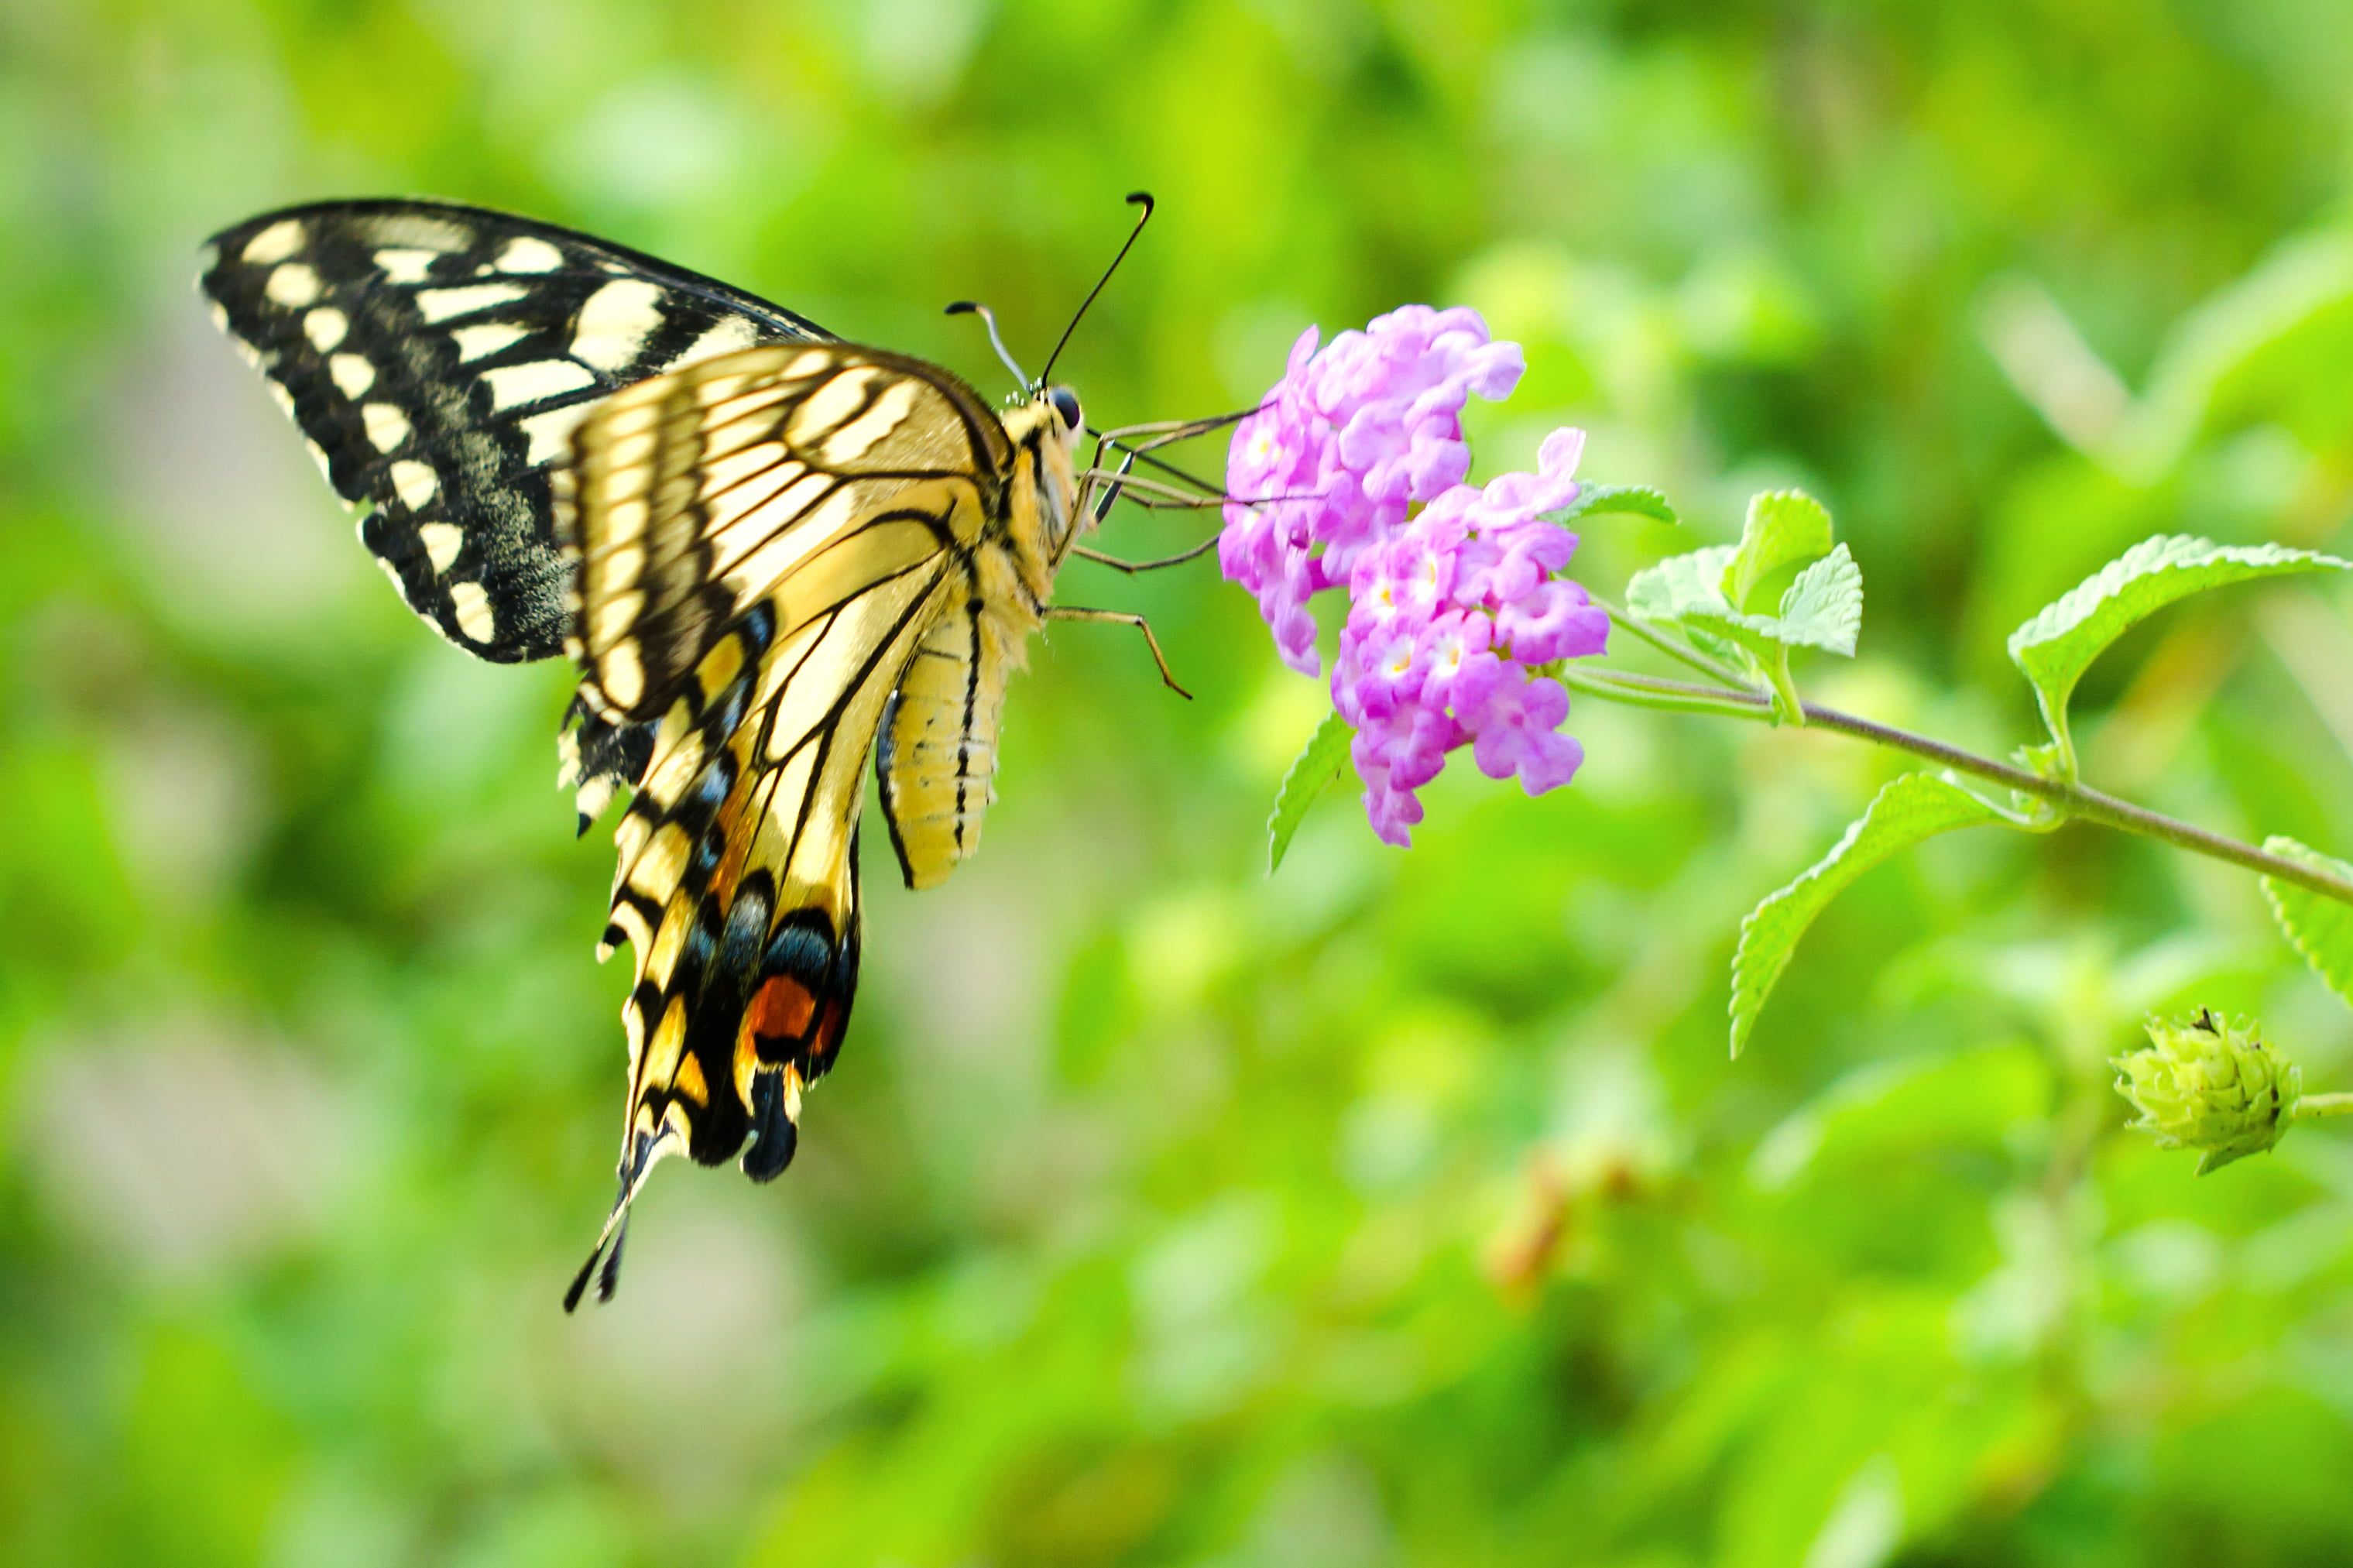 Purple lantana flower with brown Tiger Swallowtail butterfly